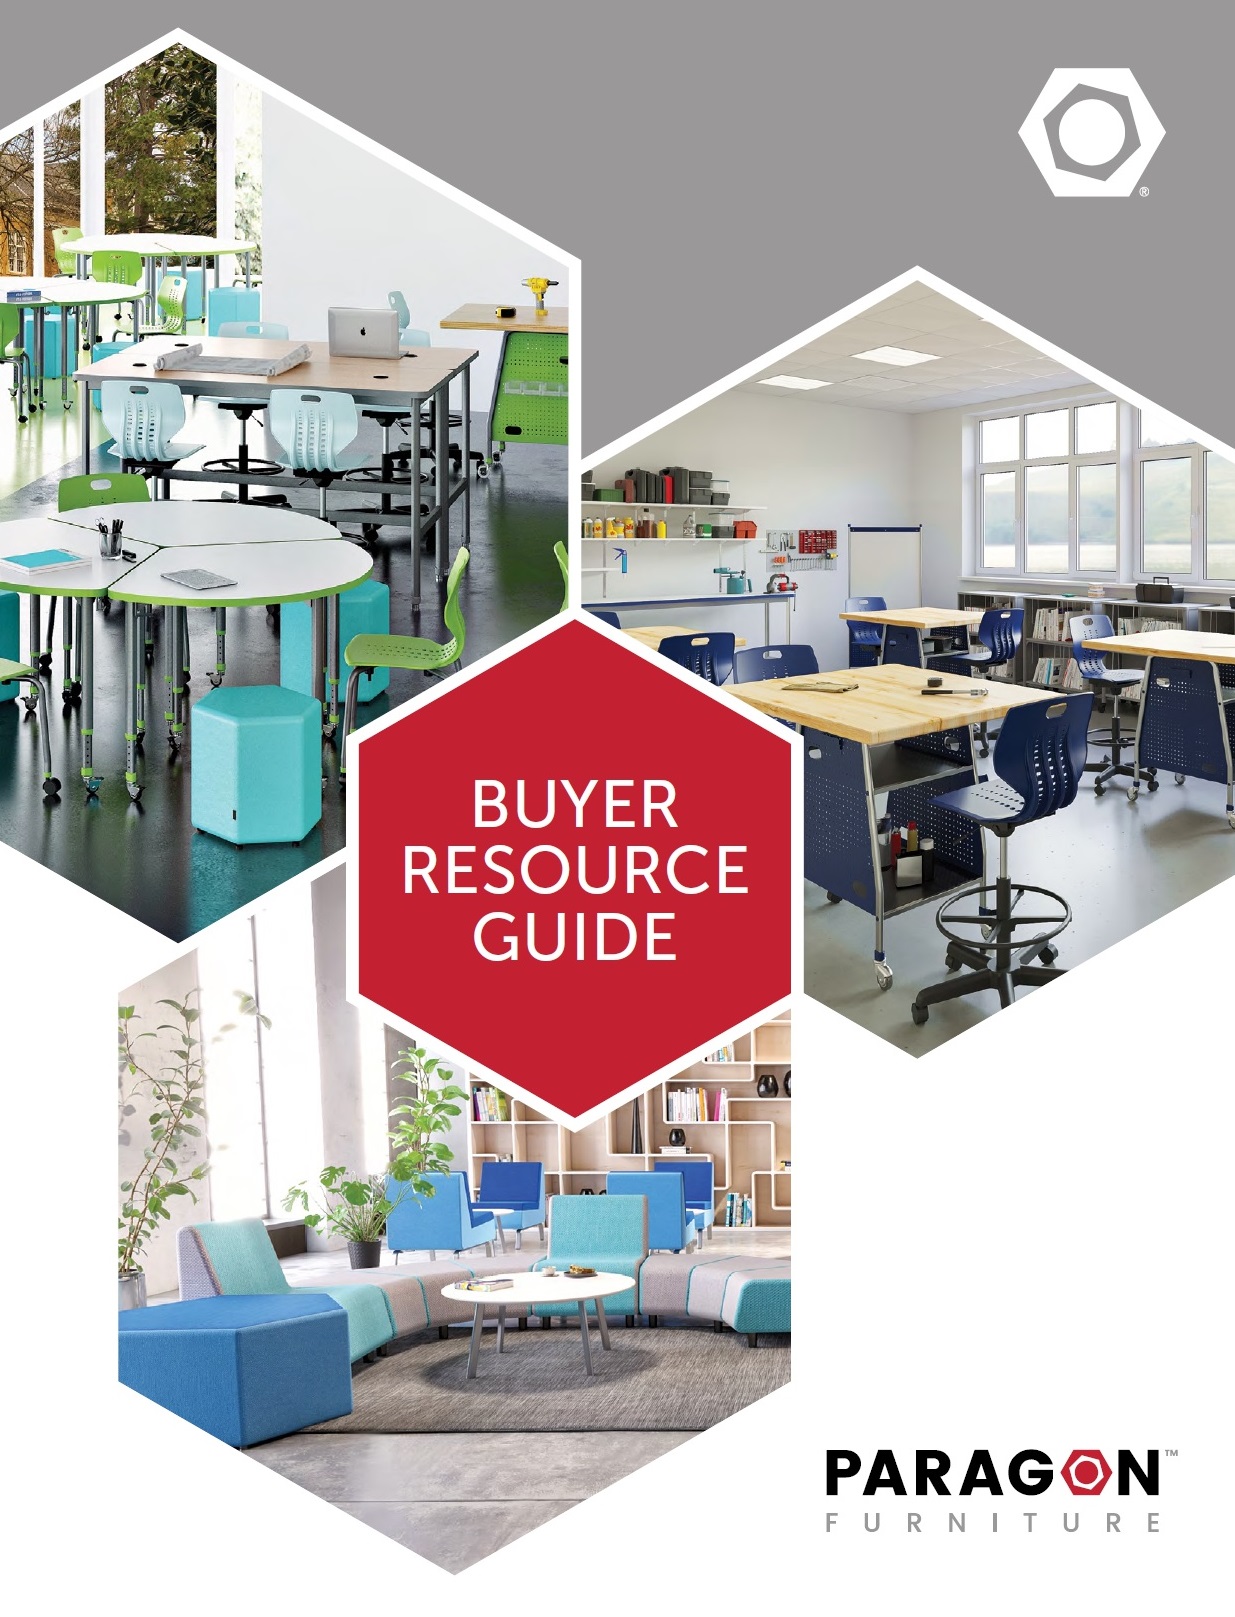 BUYER RESOURCE GUIDE - PARAGON FURNITURE - V4